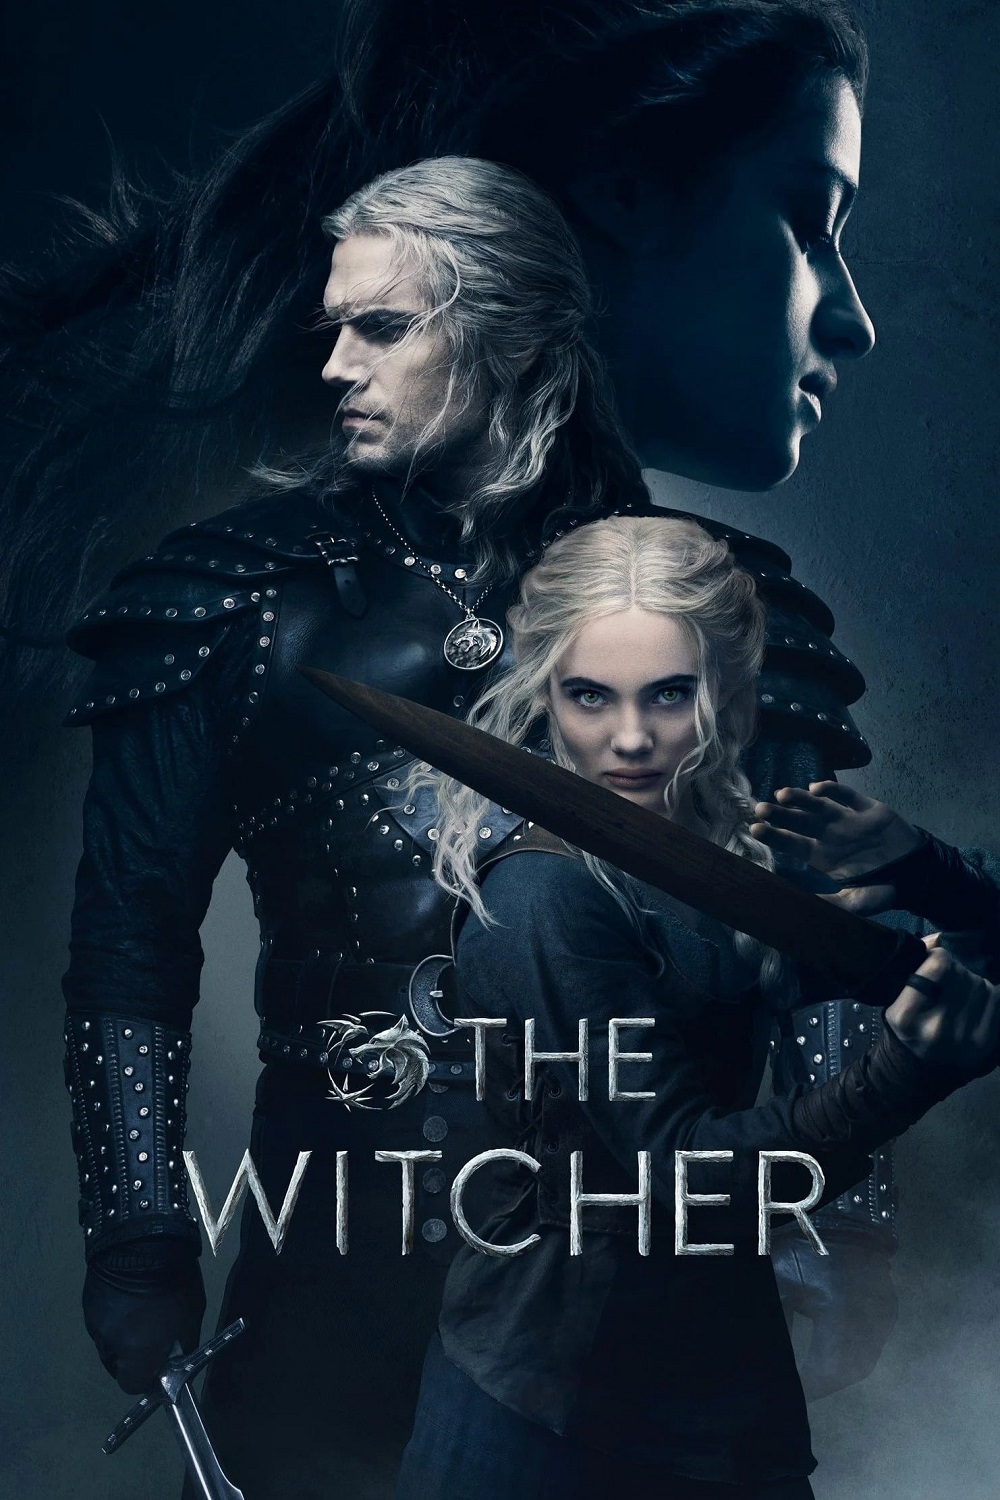 the witcher poster.jpg